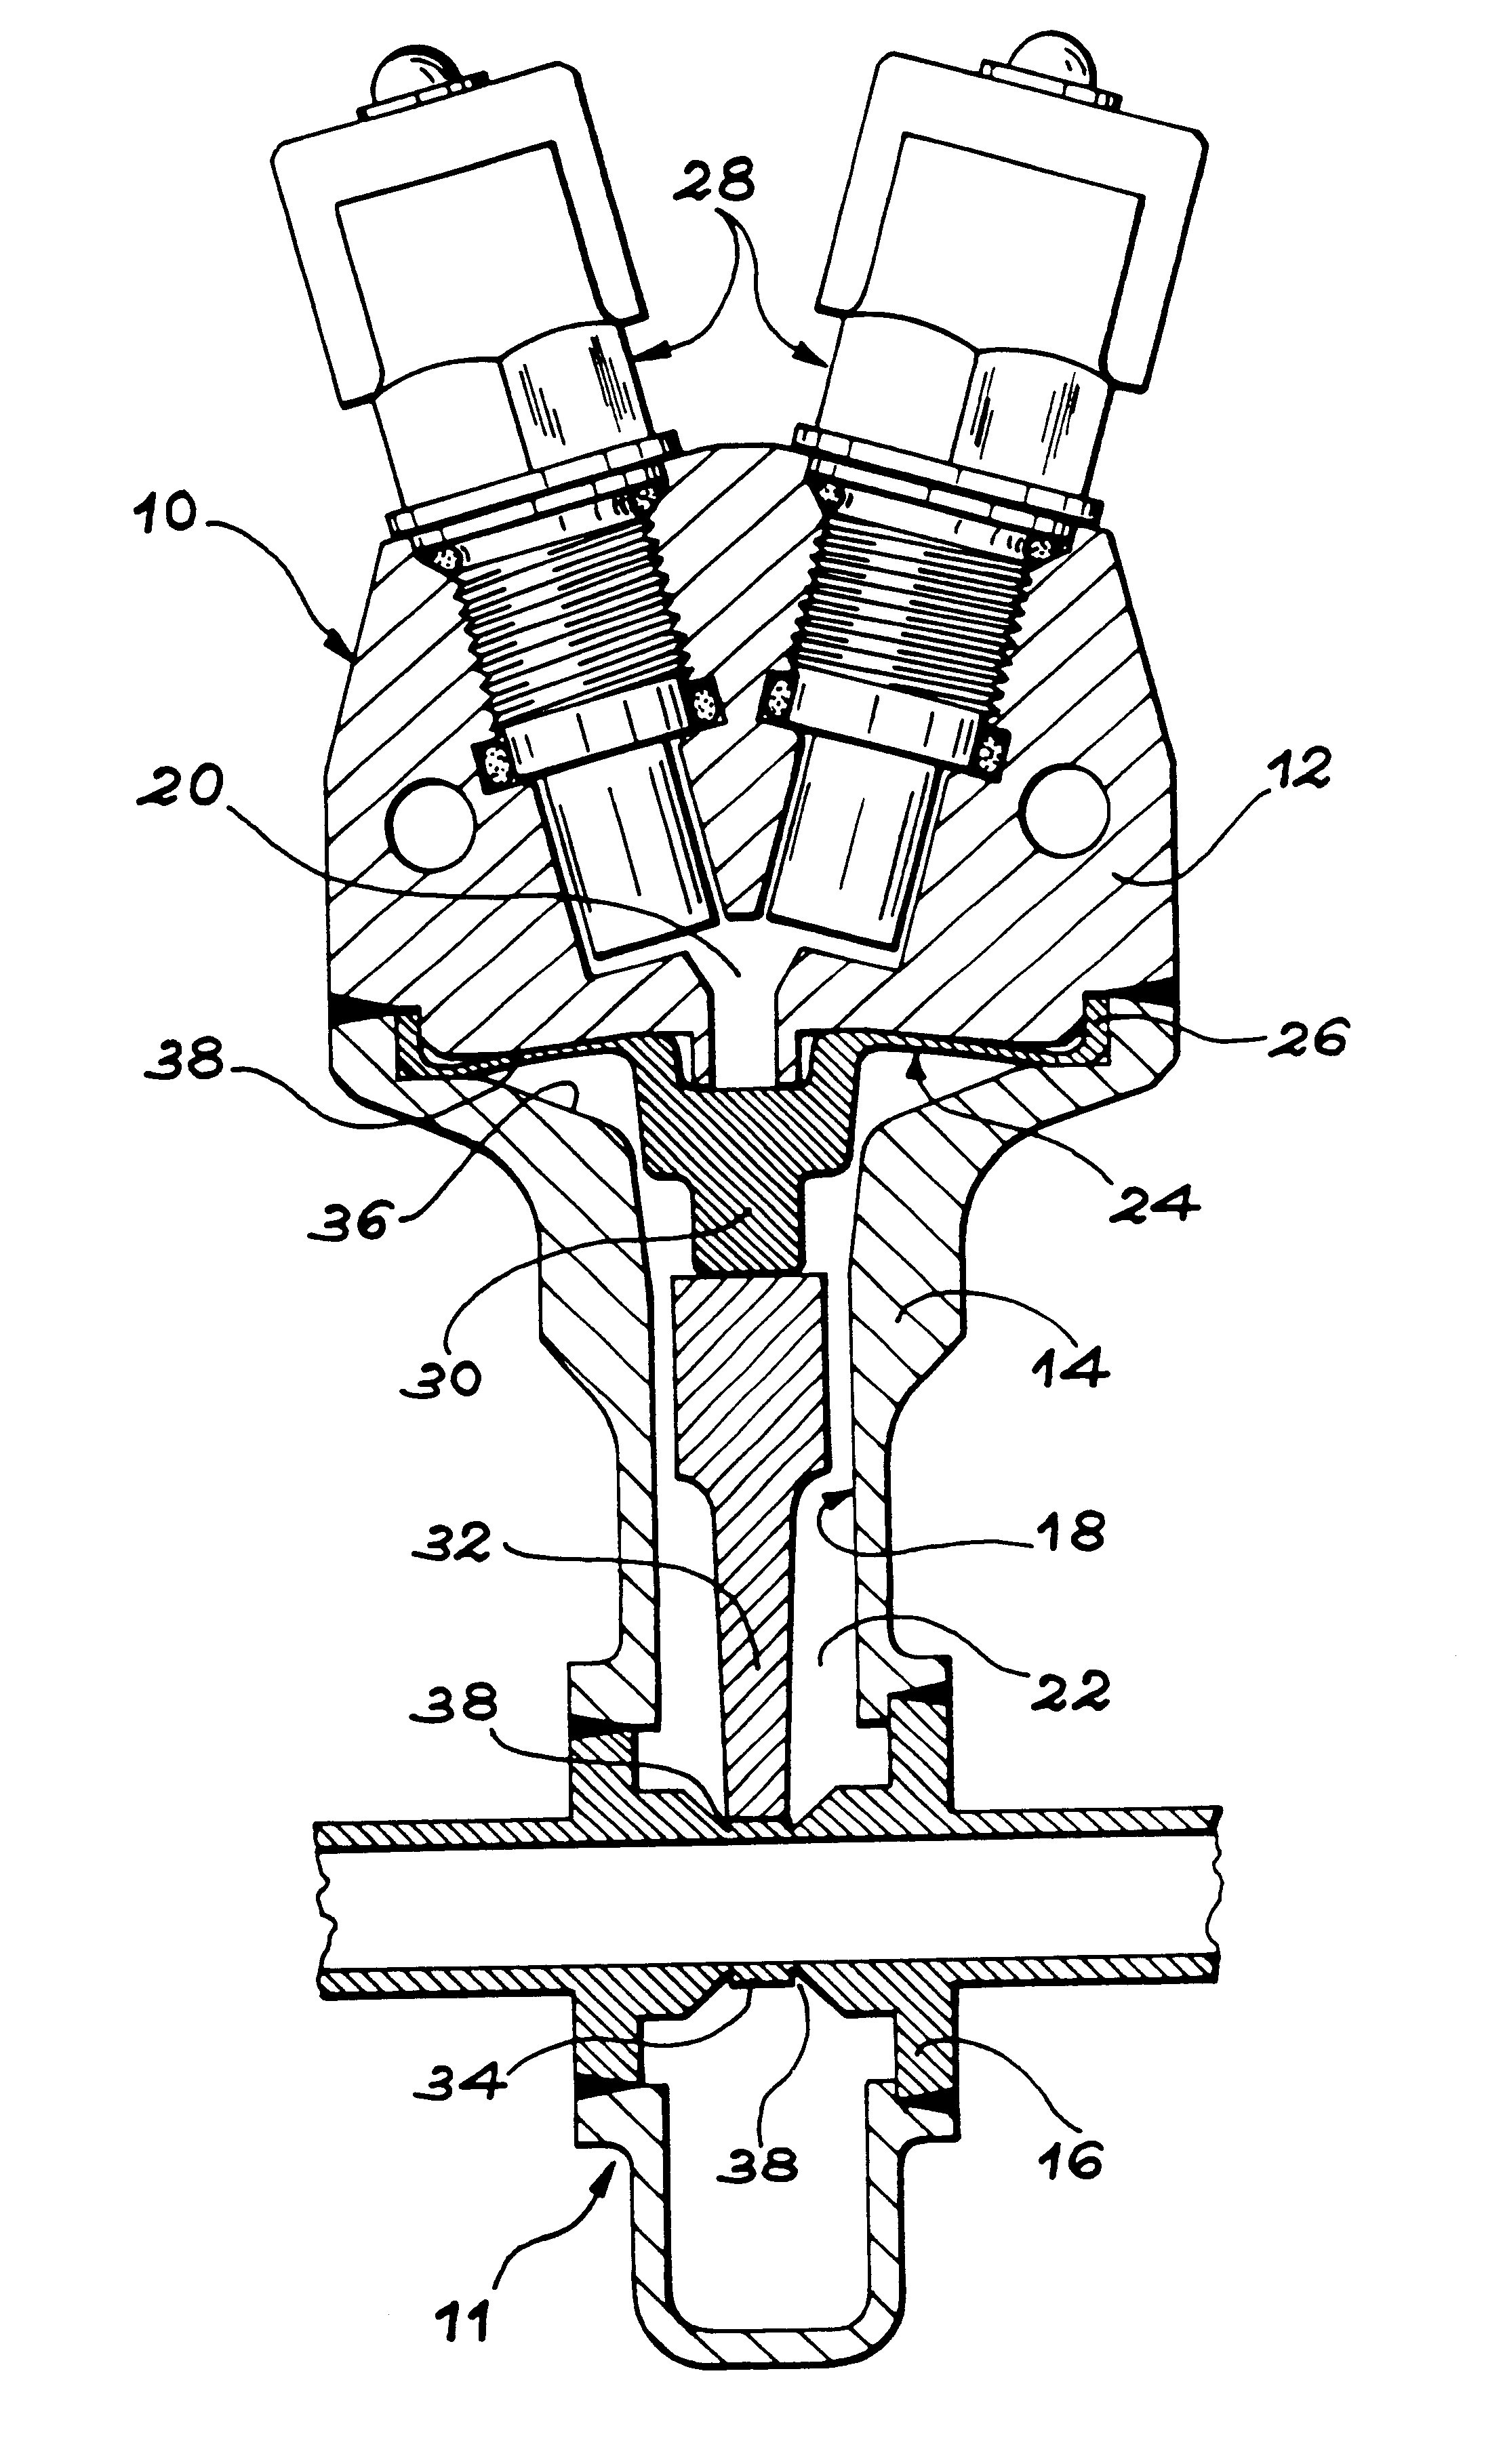 Pyrotechnic actuator with a deformable membrane